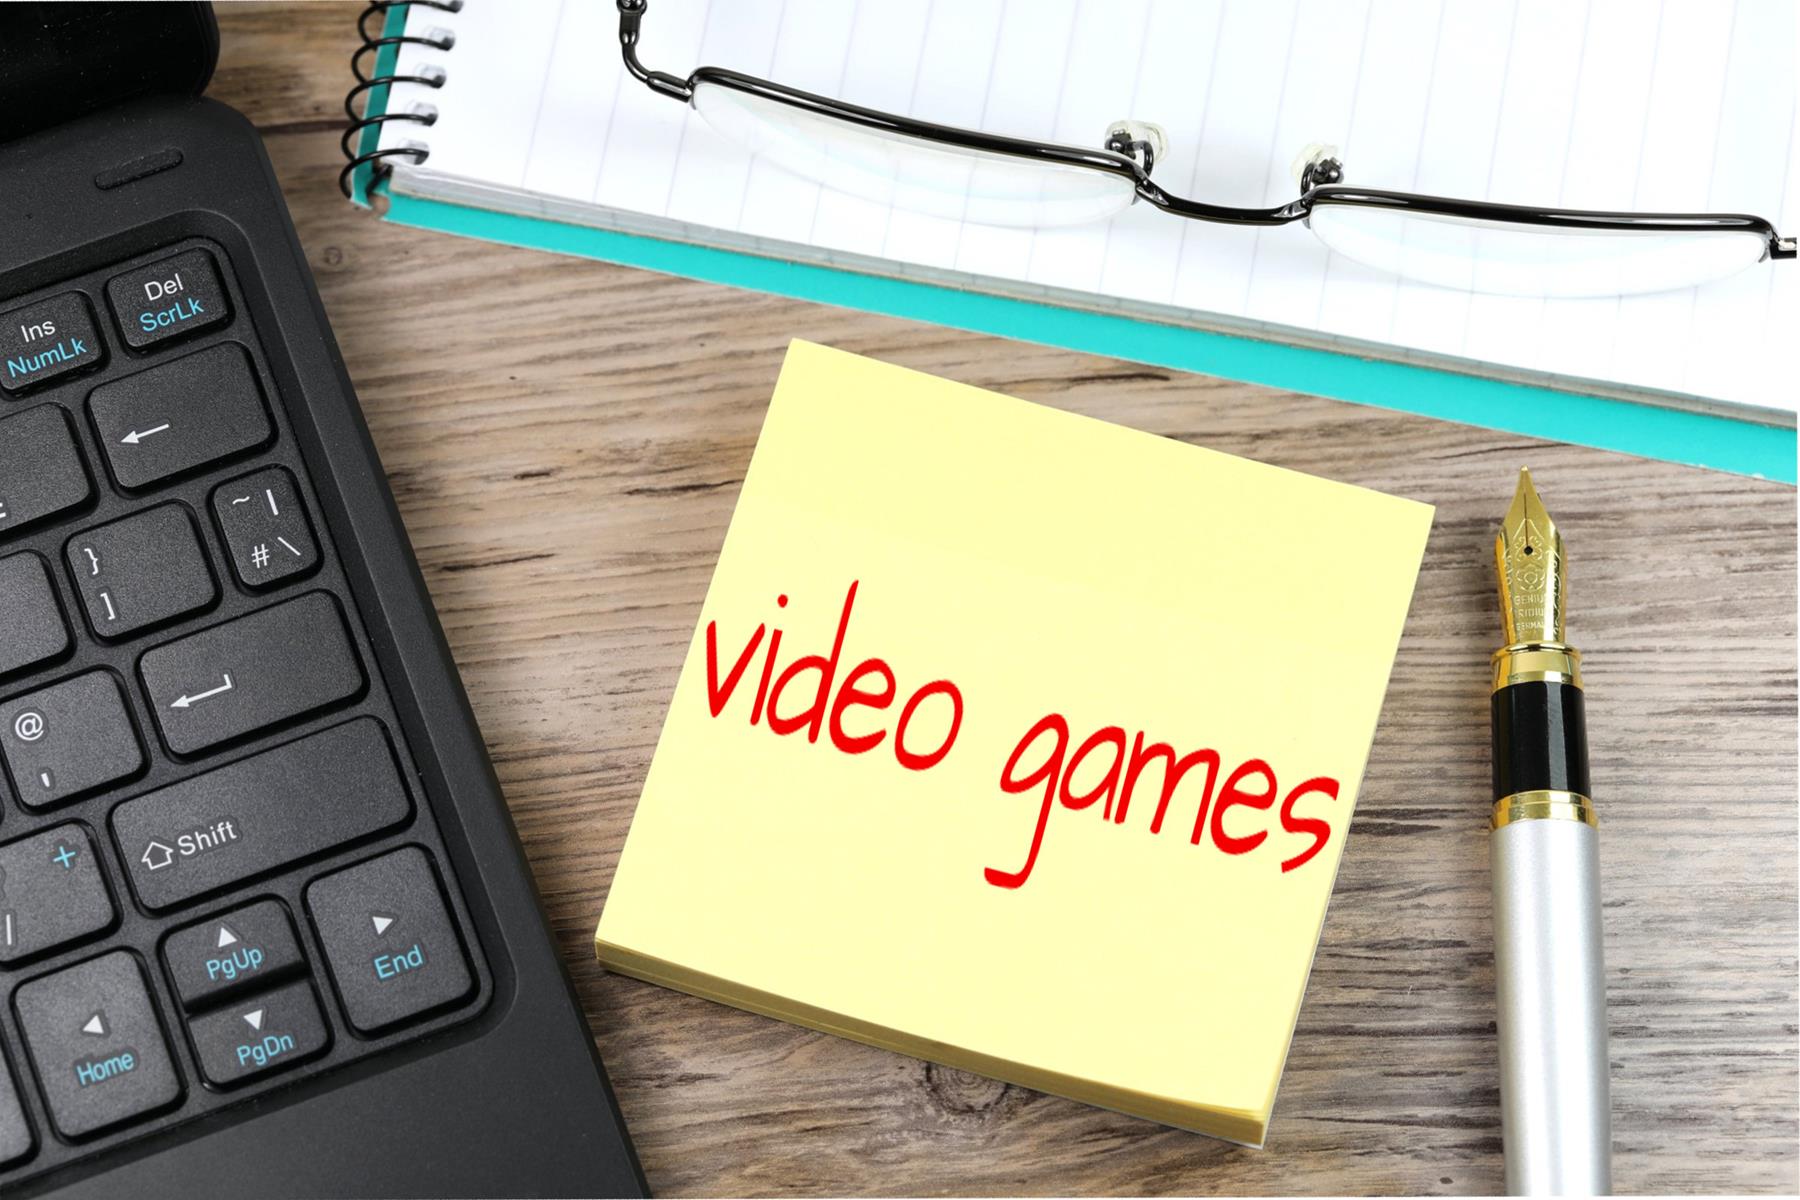 Video Games - Free of Charge Creative Commons Post it Note image